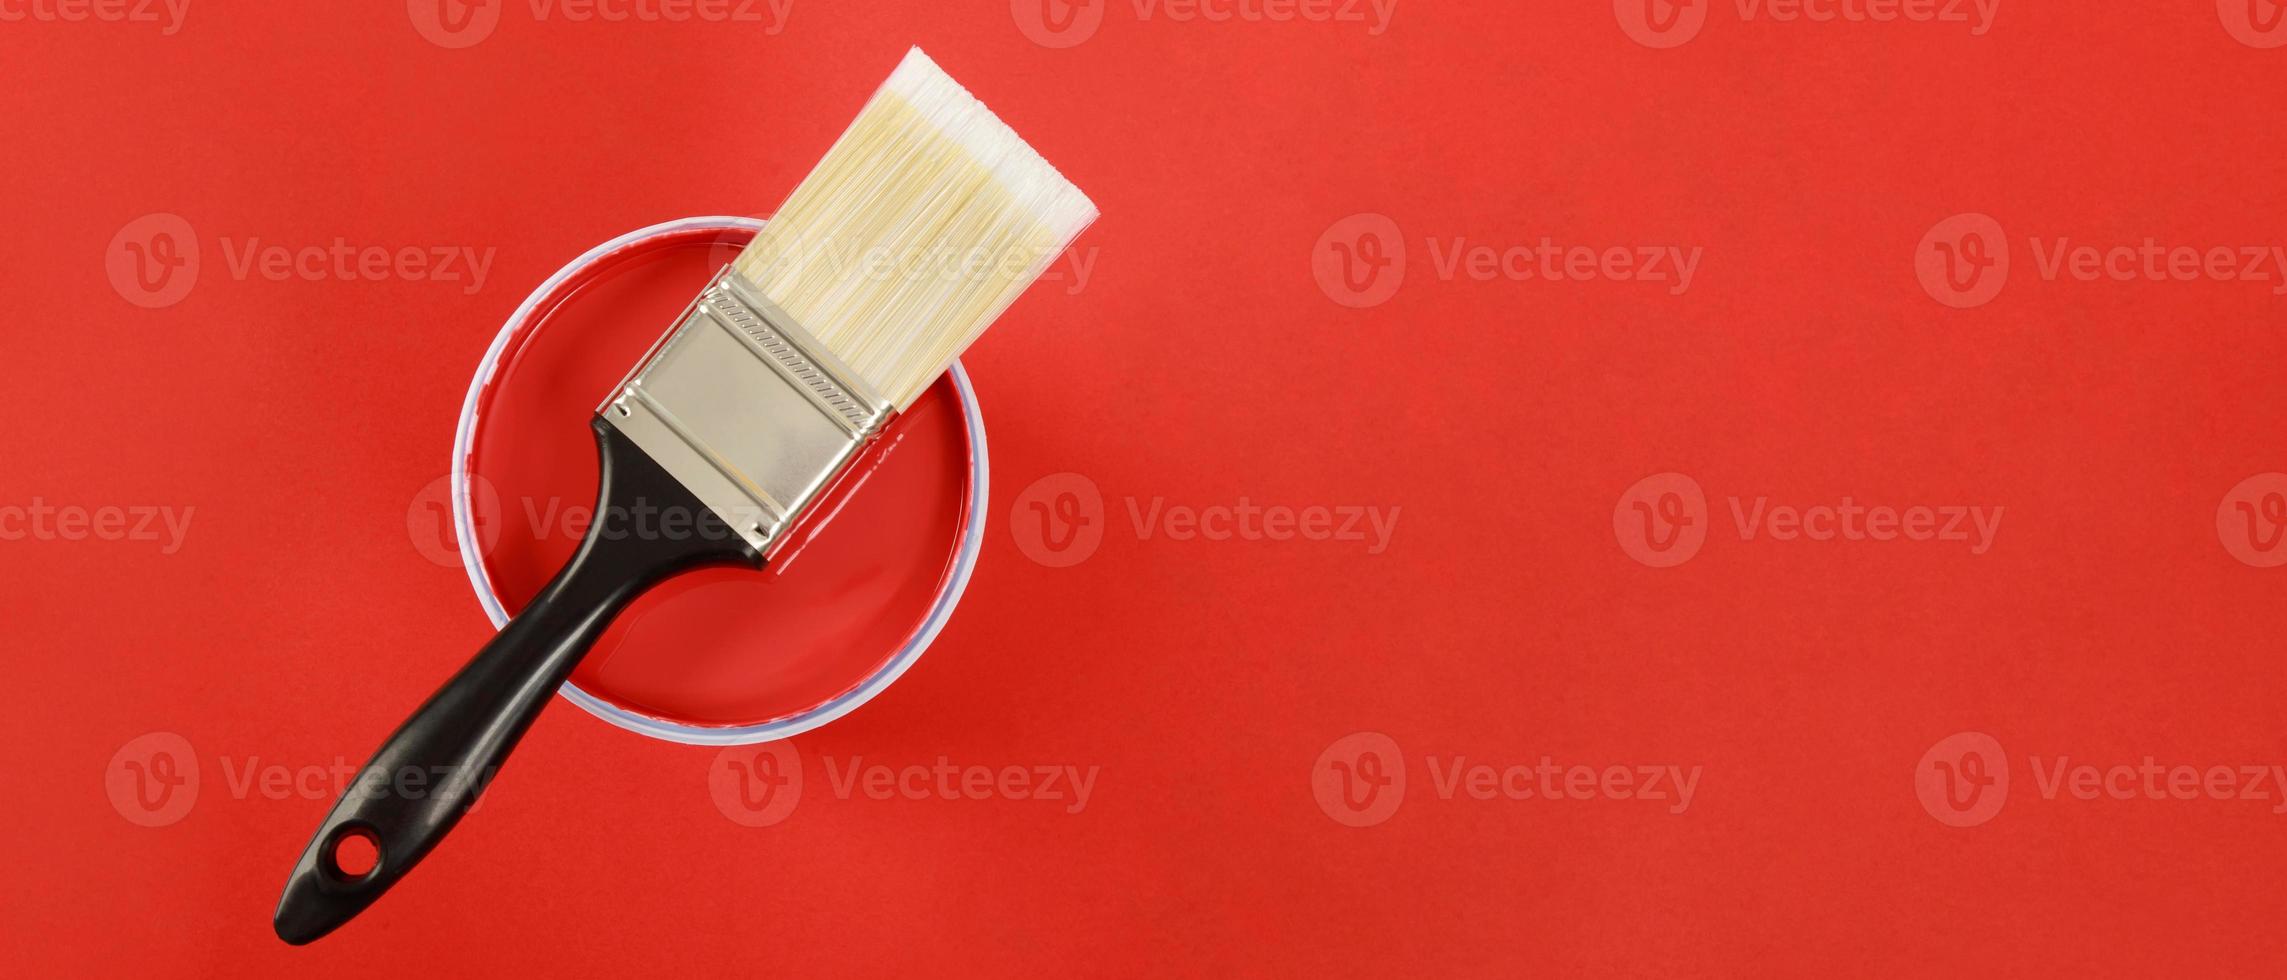 The cans of interior wall paint is placed on a red background. photo